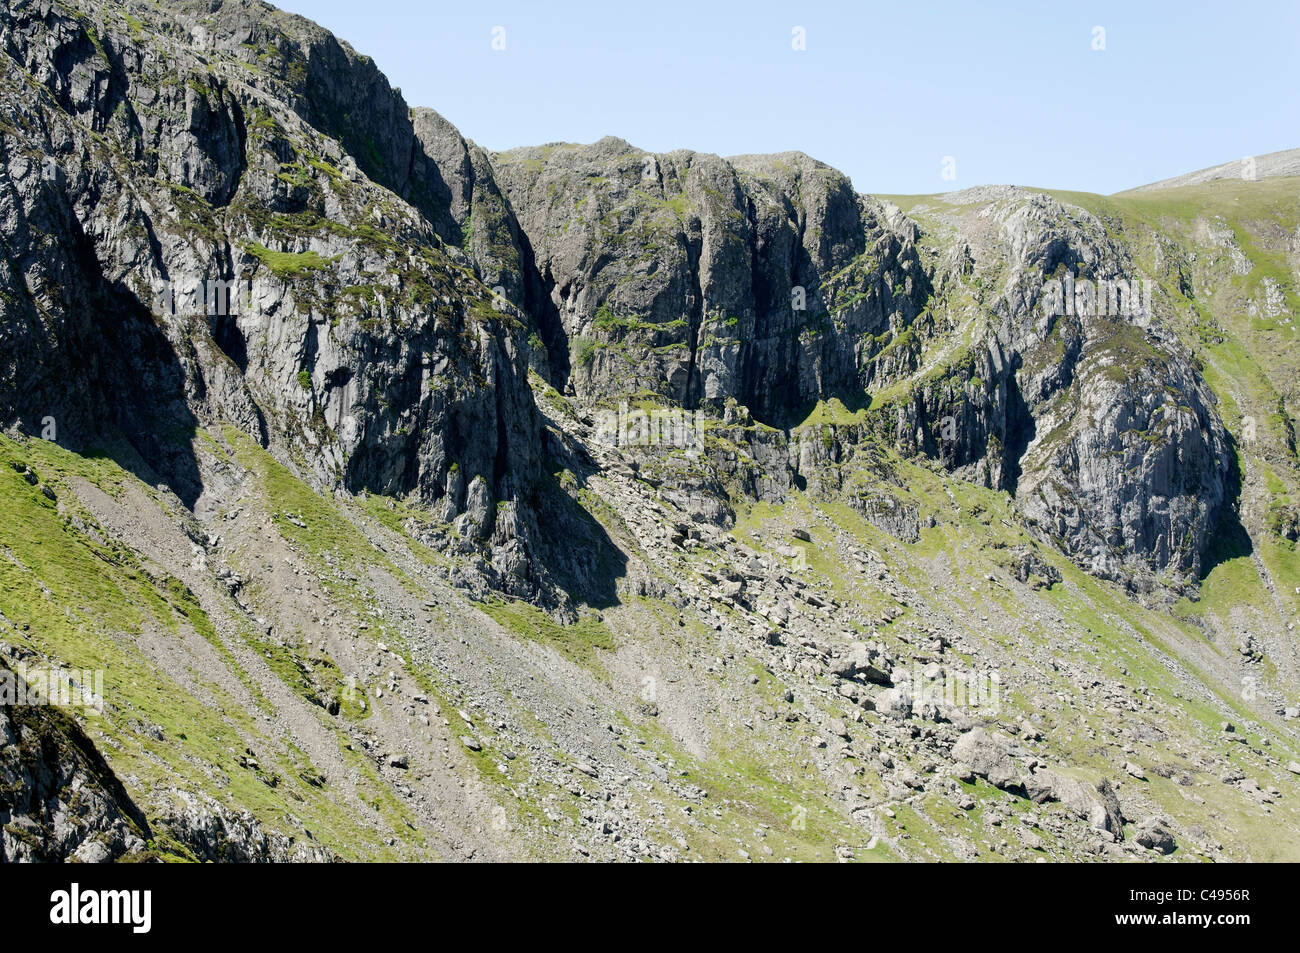 The Cwm Idwal syncline in Snowdonia National Park. Stock Photo